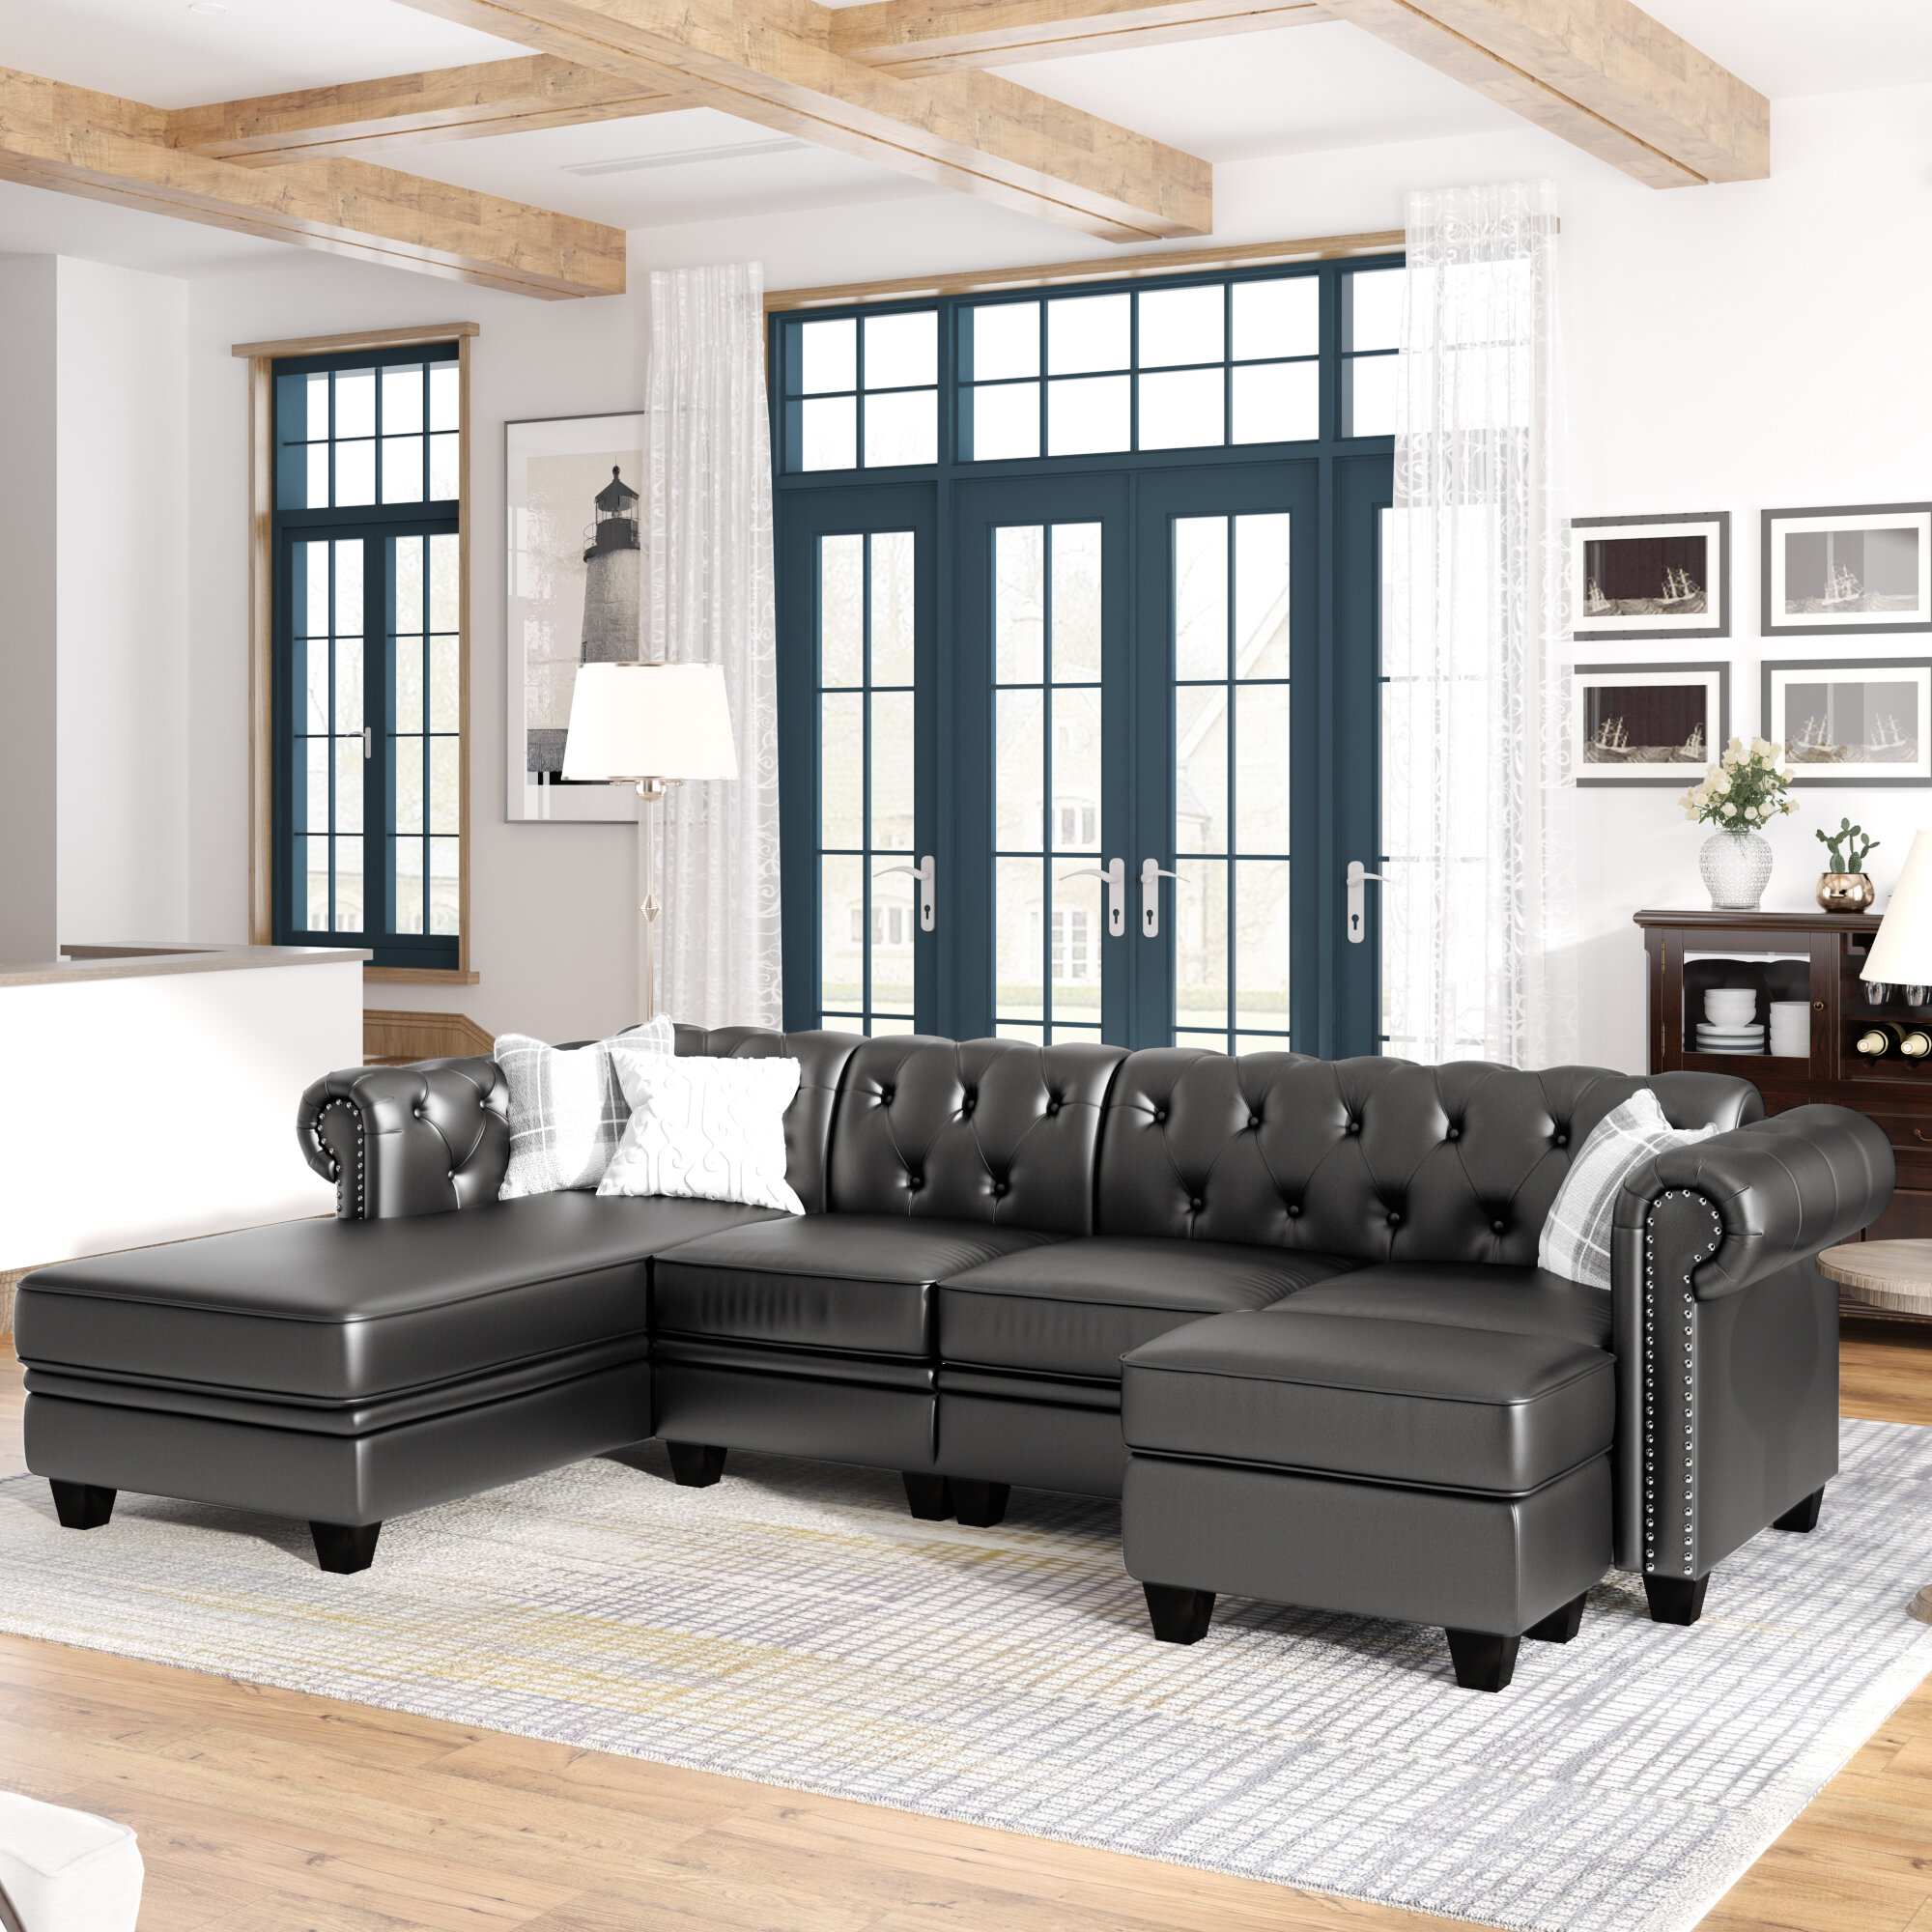 Red Barrel Studio 116 Chesterfield Sectional Sofa Set Pu Leather 4 Seat Living Room Set L Shape Couch In Home With Storage Ottoman Nailheaded Wayfair